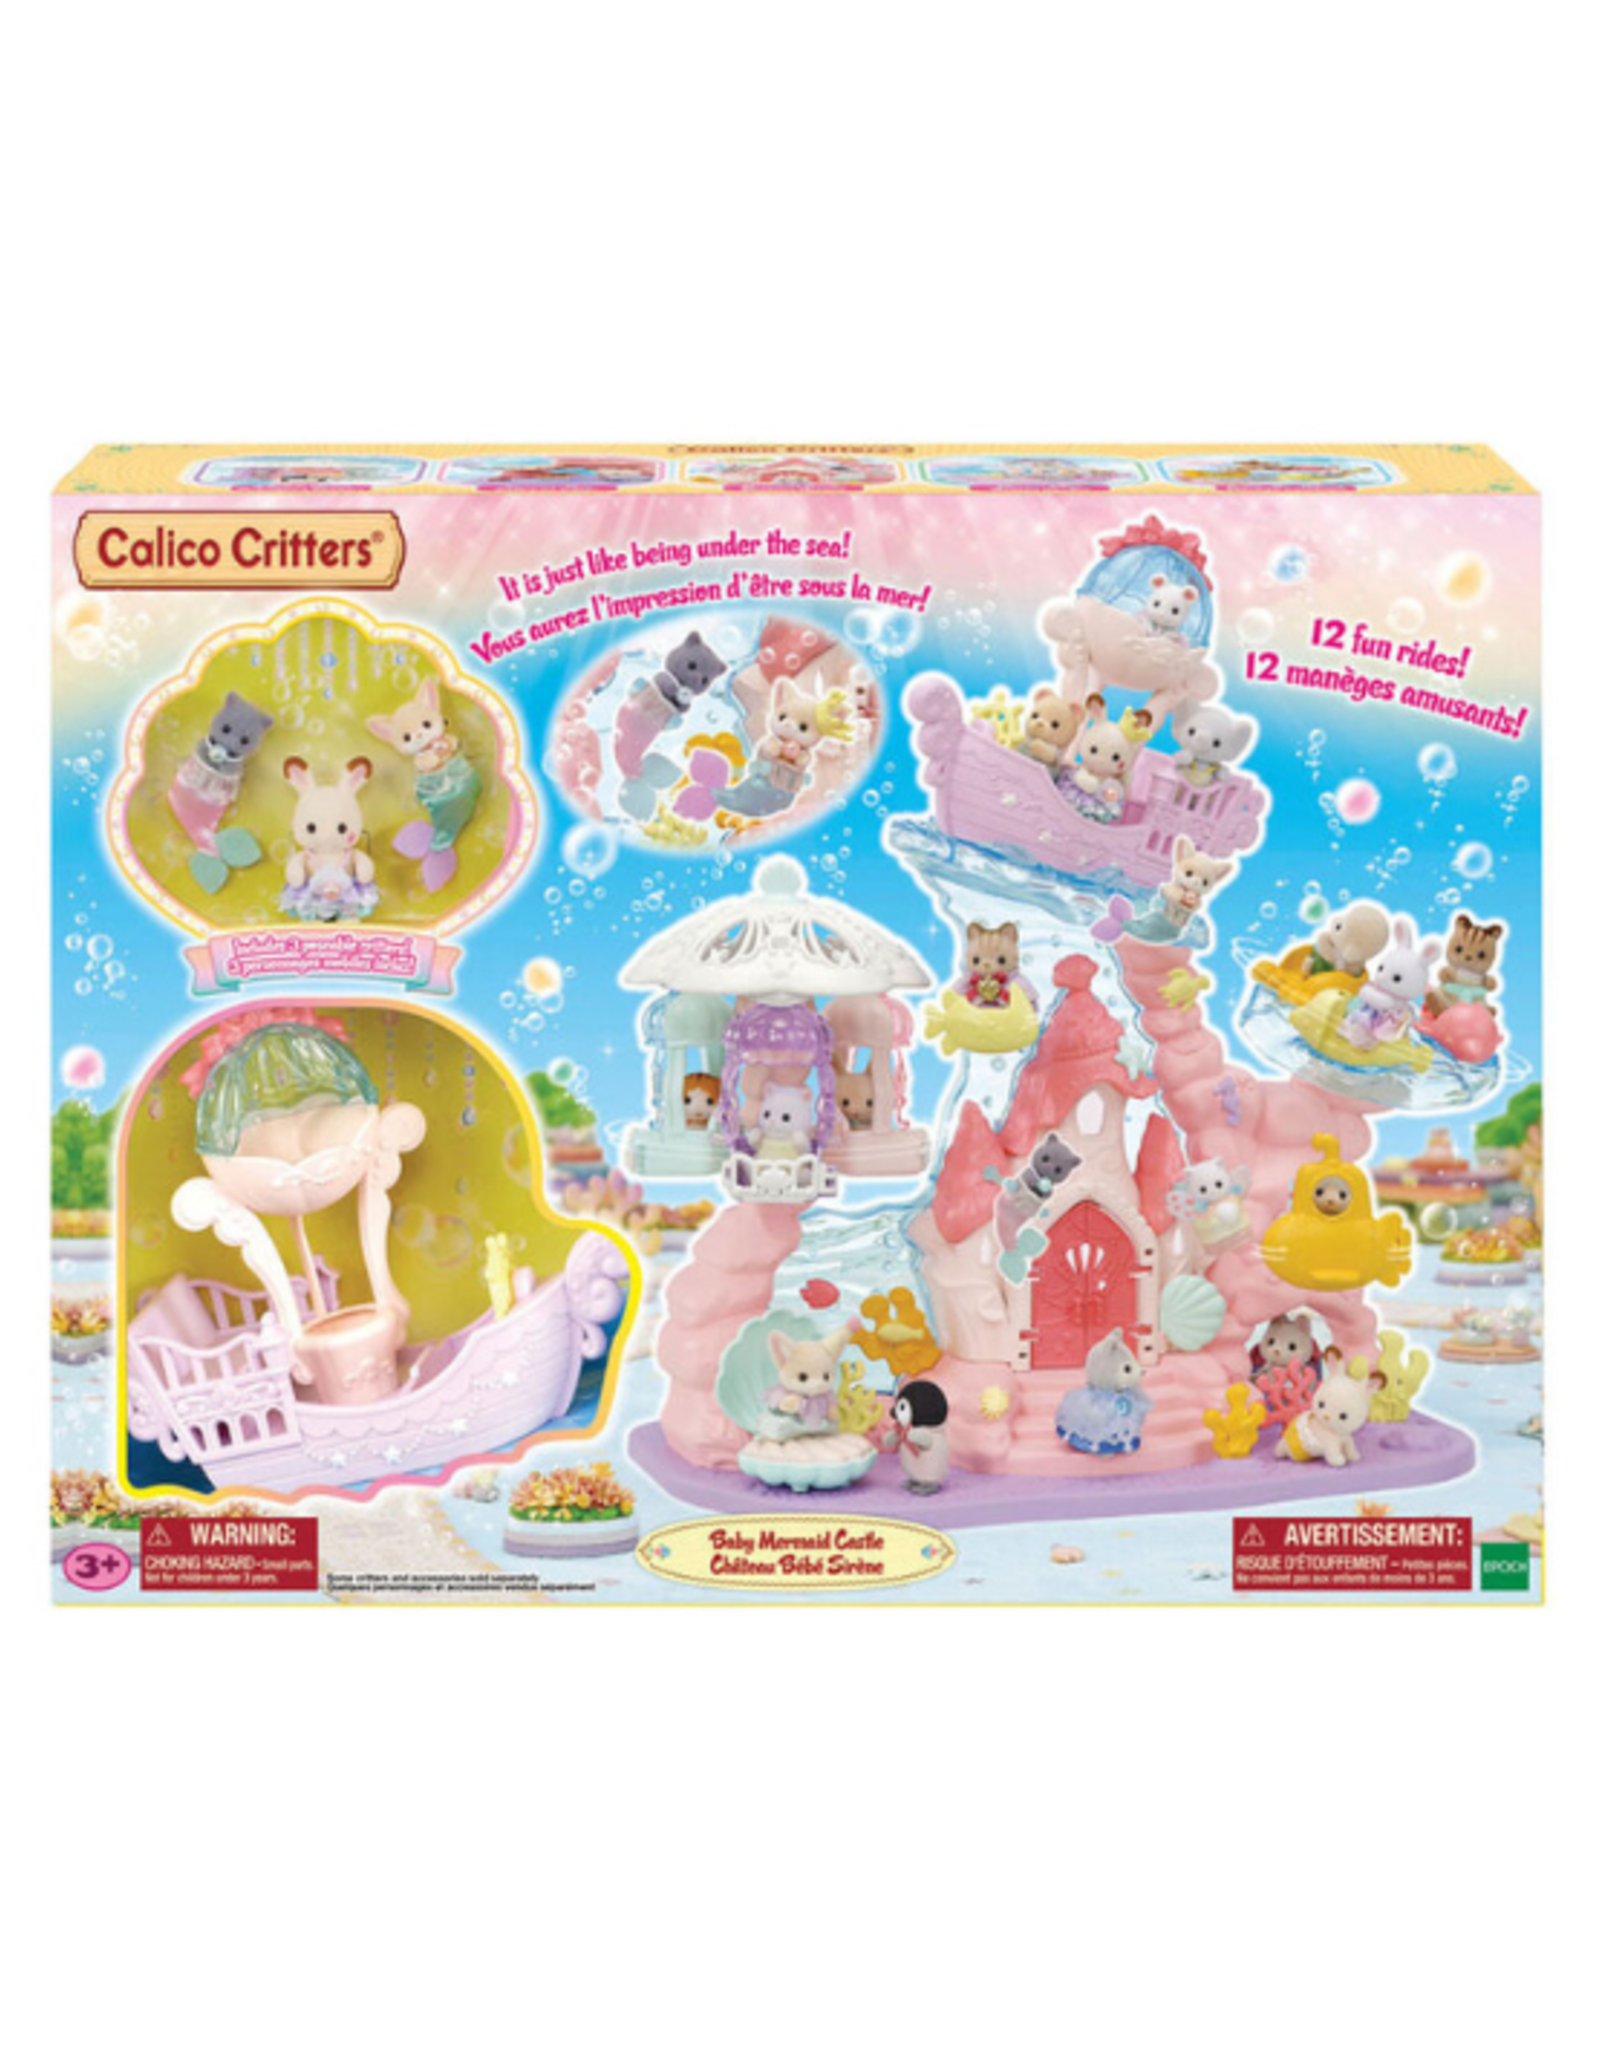 Calico Critters Calico Critters - Baby Mermaid Castle